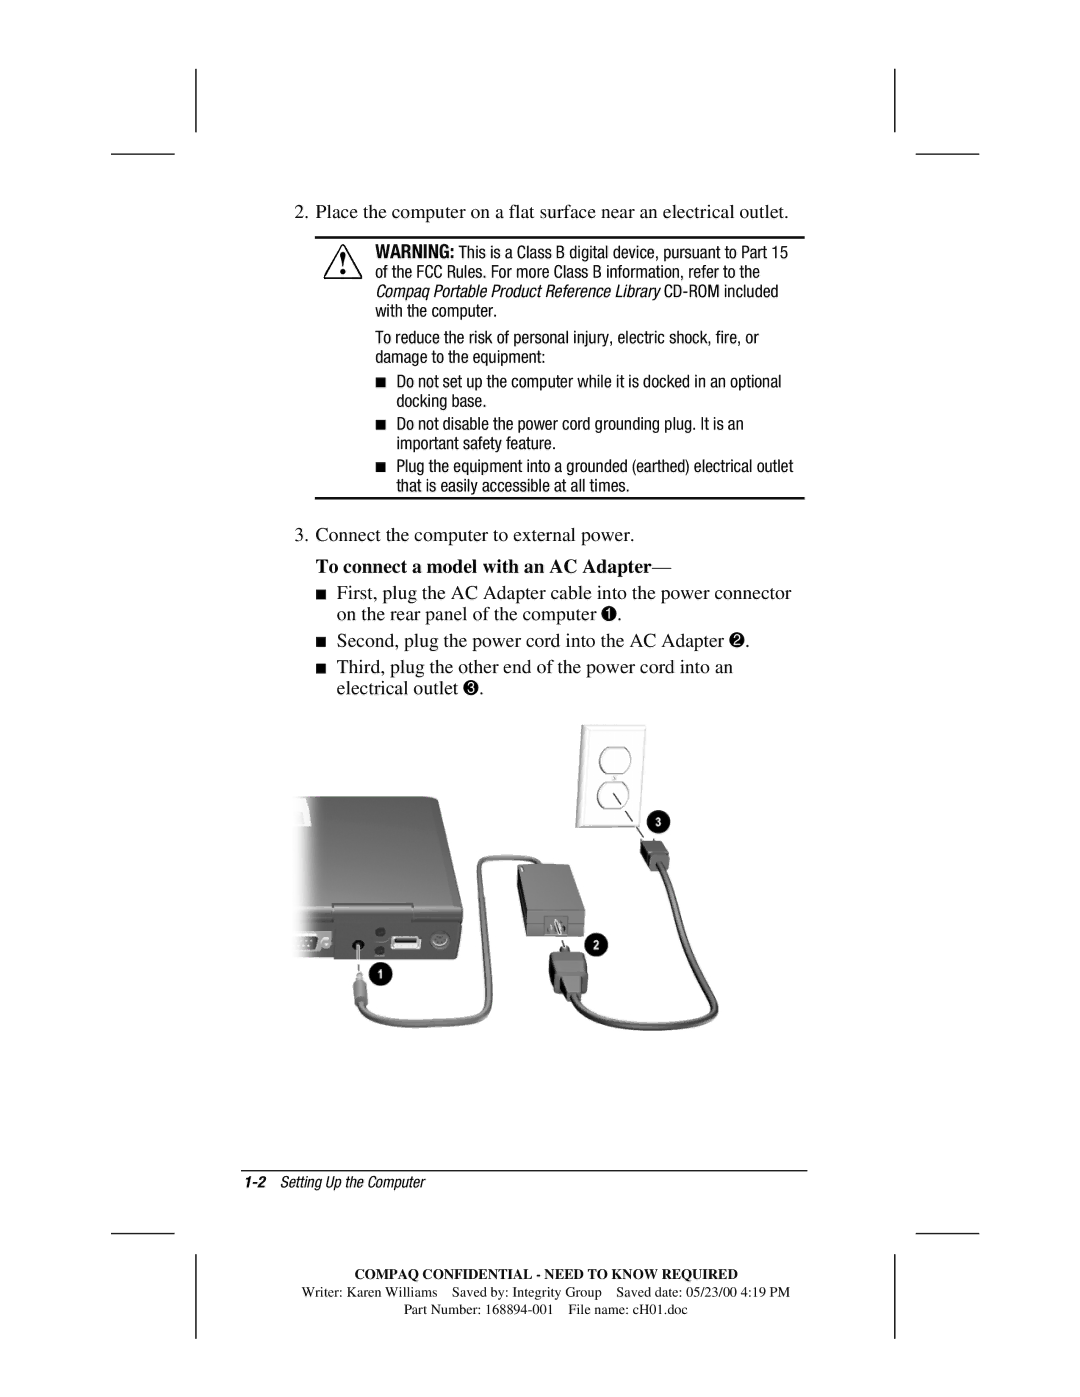 HP m700 manual To connect a model with an AC Adapter, 2Setting Up the Computer 